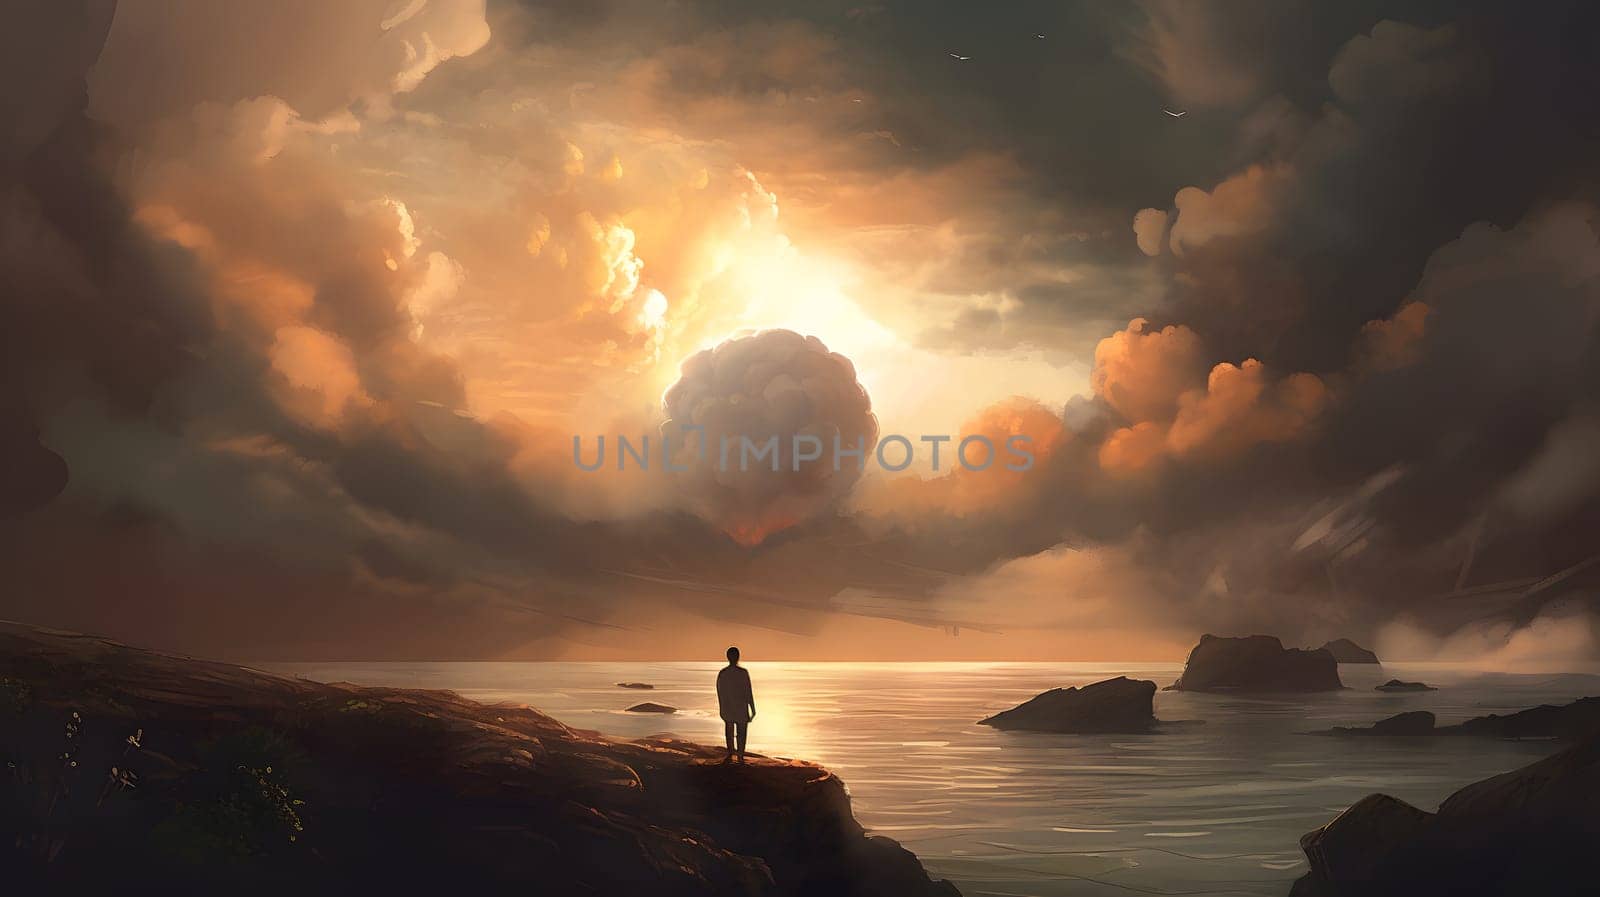 beautiful sunset in the clouds with alone human figure silhouette on sea shore in the background, neural network generated image by z1b